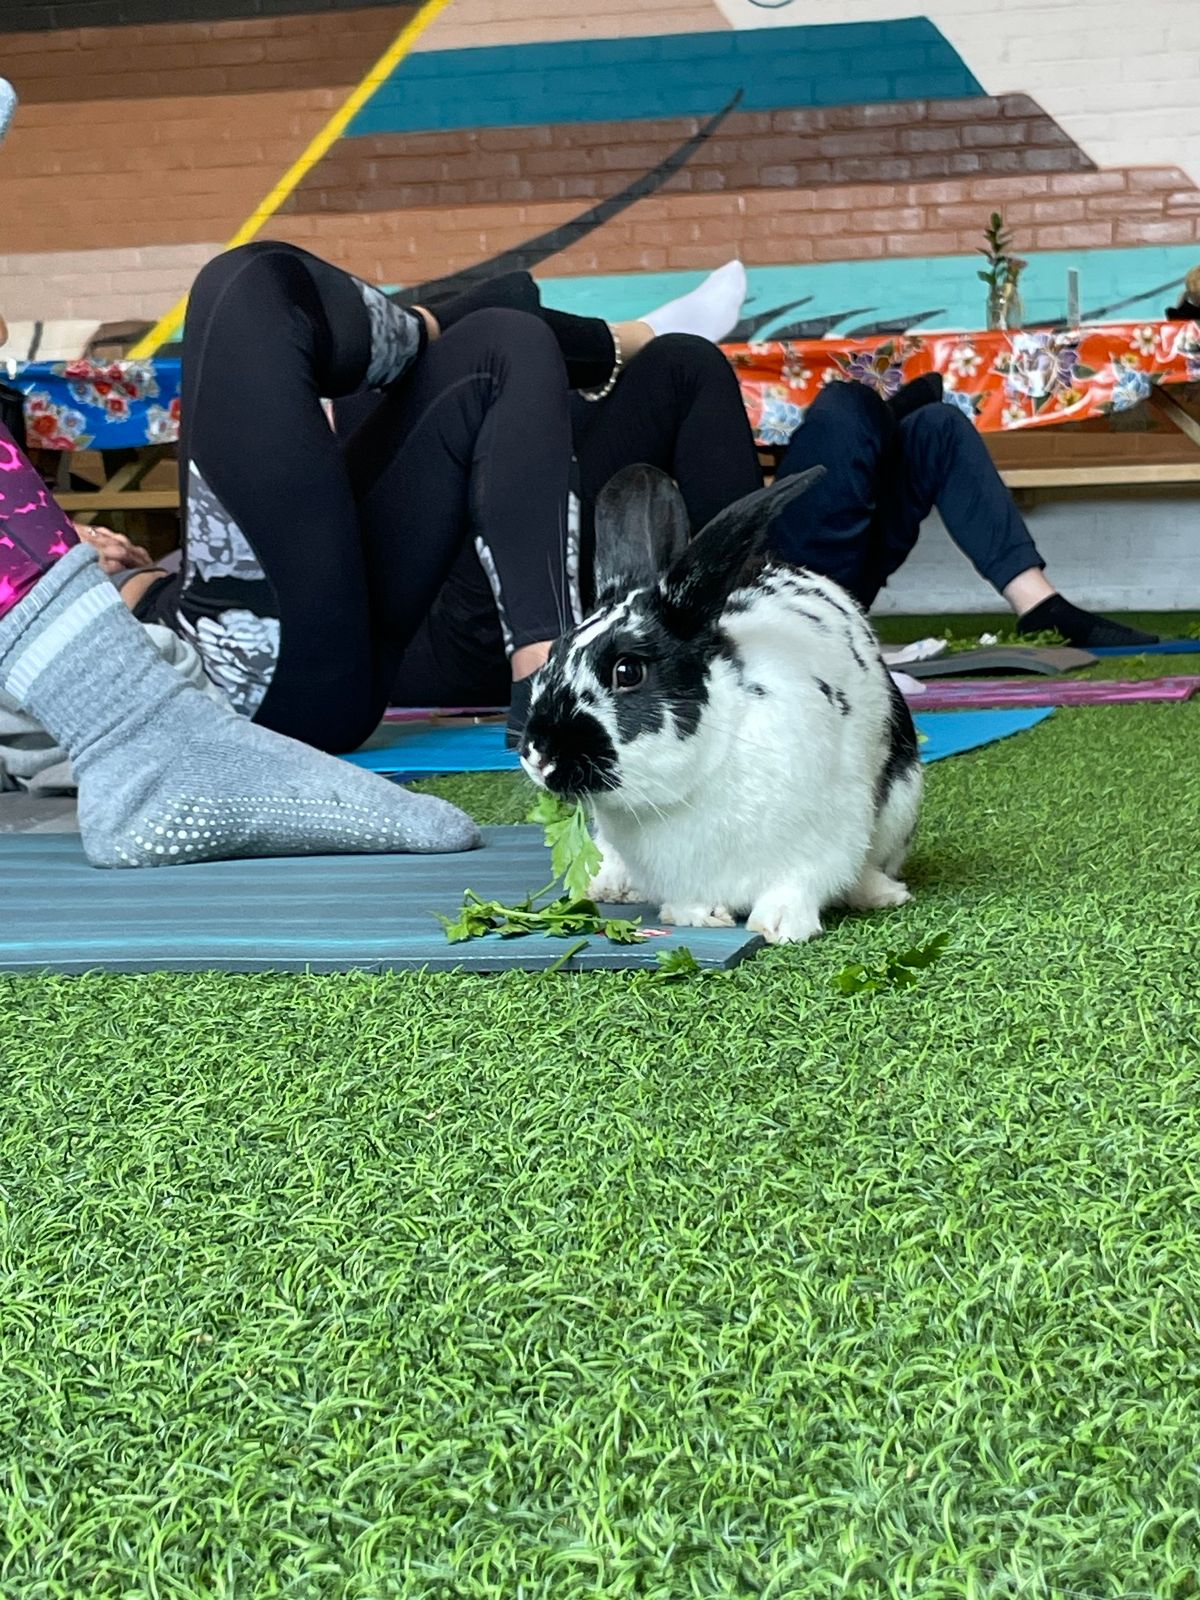 Bunny Yoga at Redemption Rock